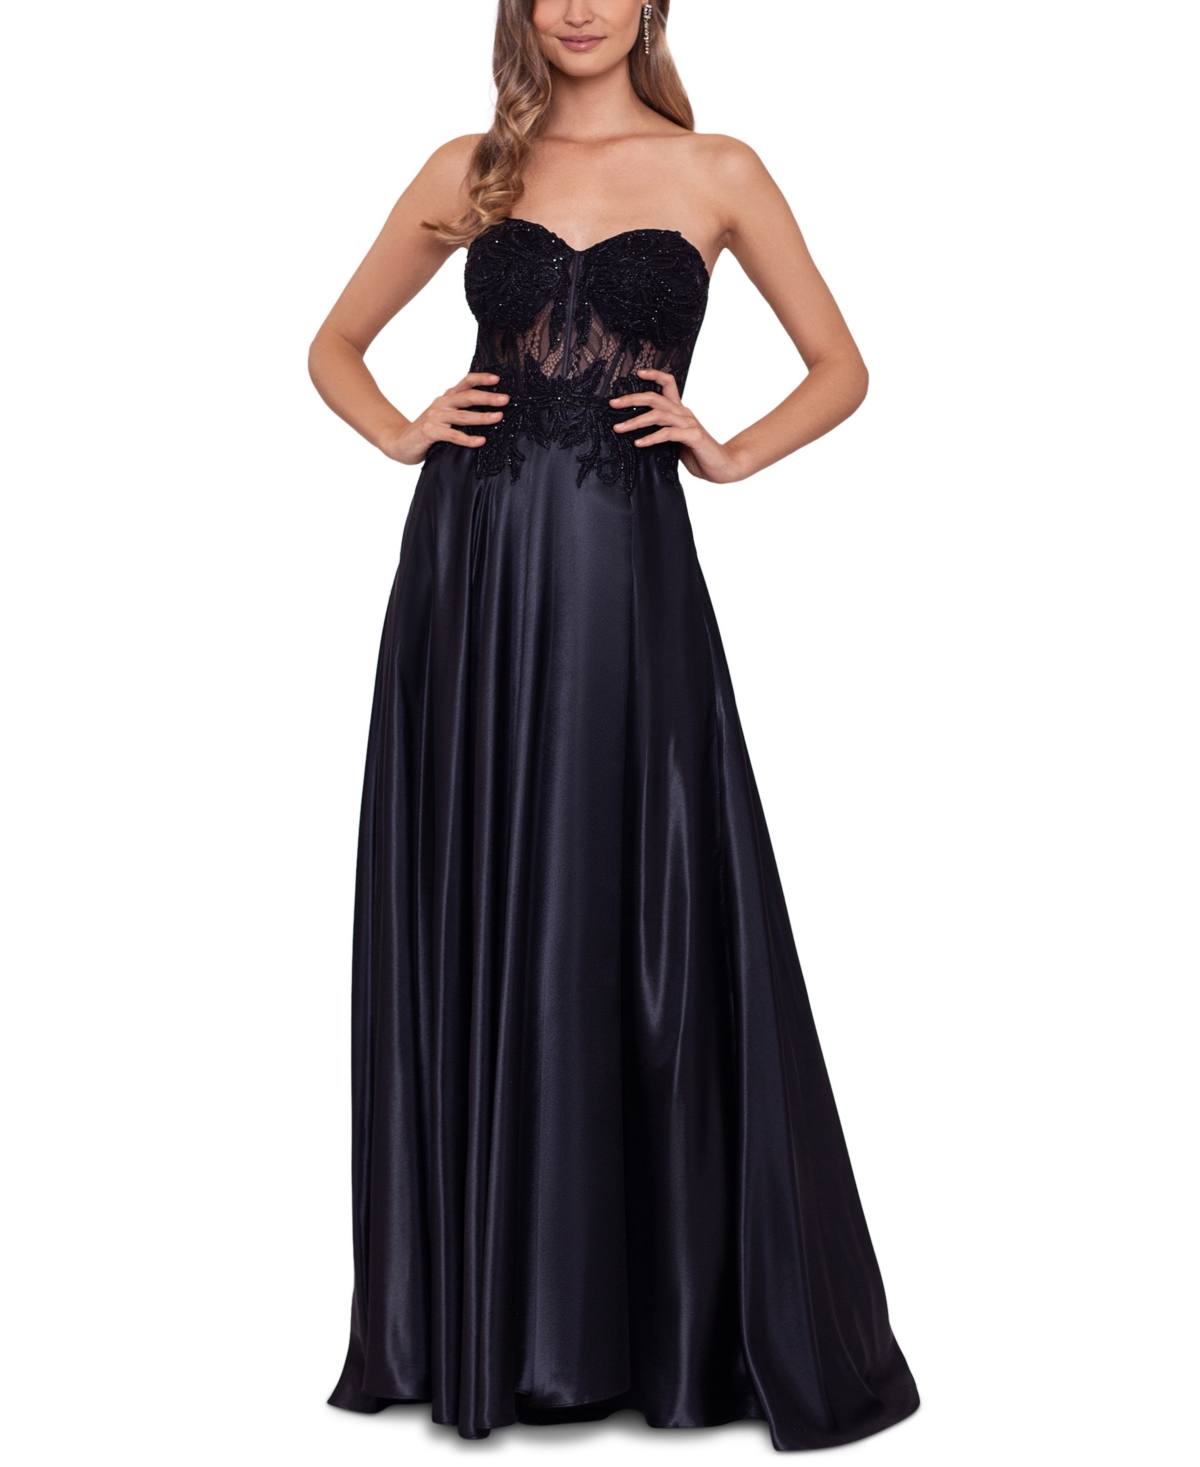 Juniors' Illusion Applique Charmeuse Gown, Created for Macy's - Black